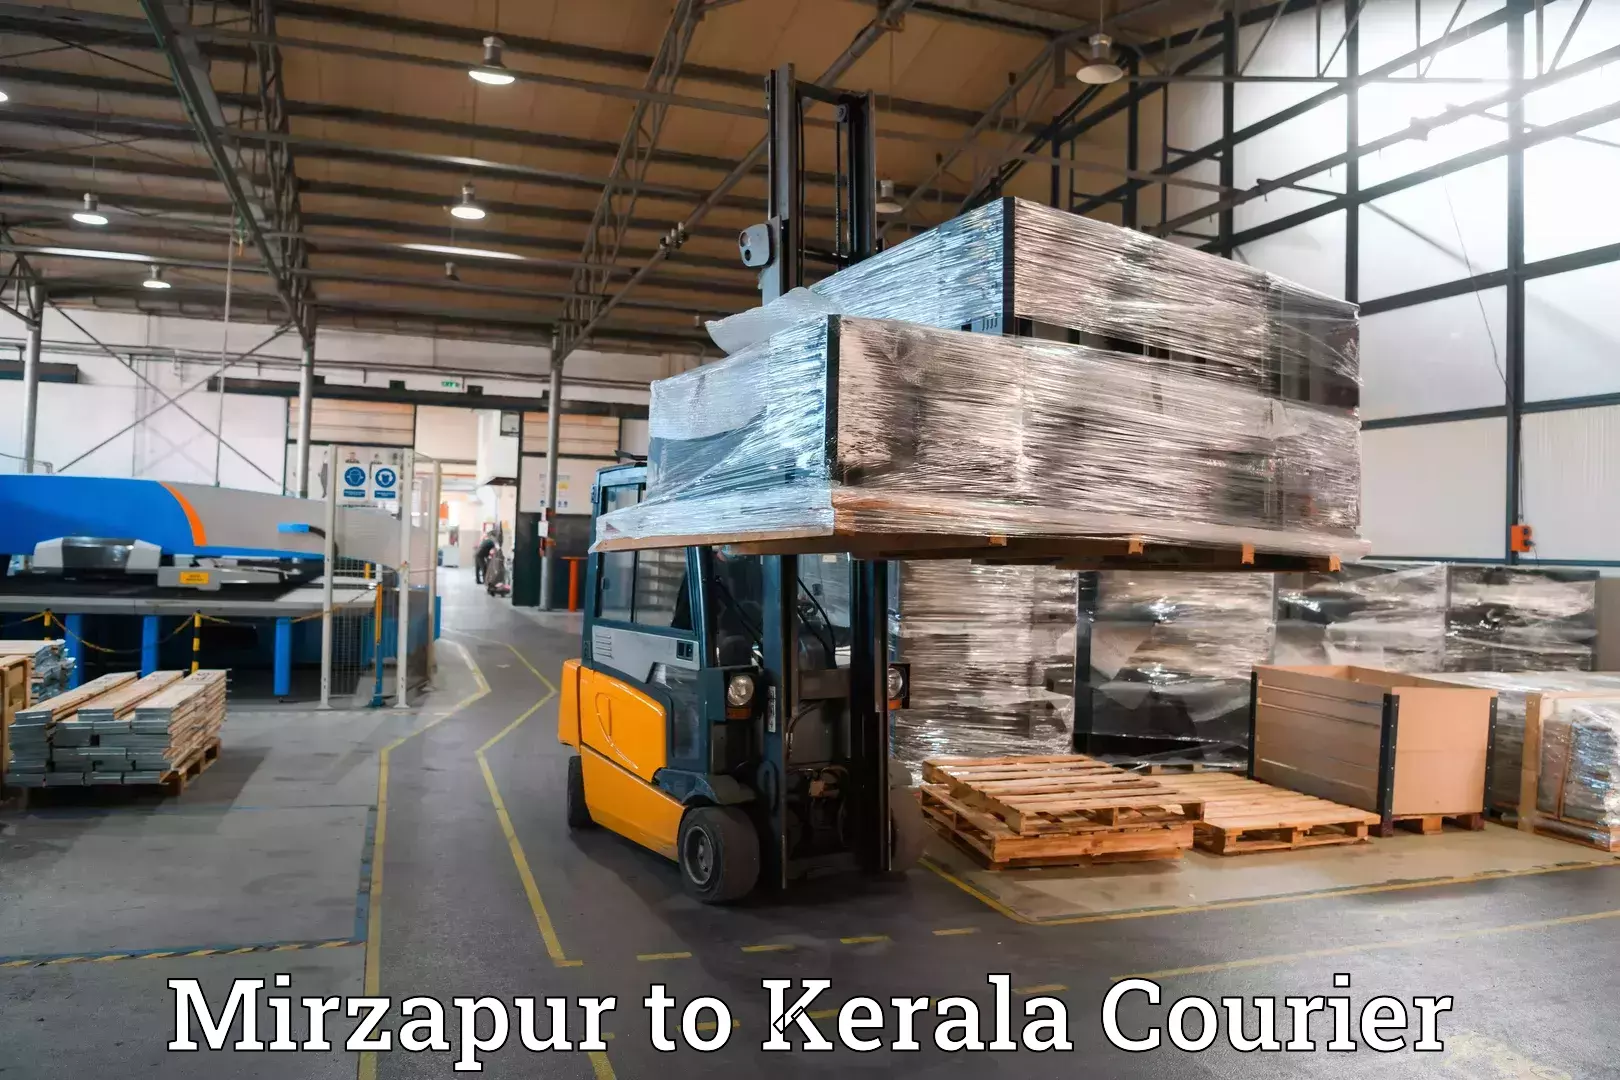 Instant baggage transport quote Mirzapur to Kerala